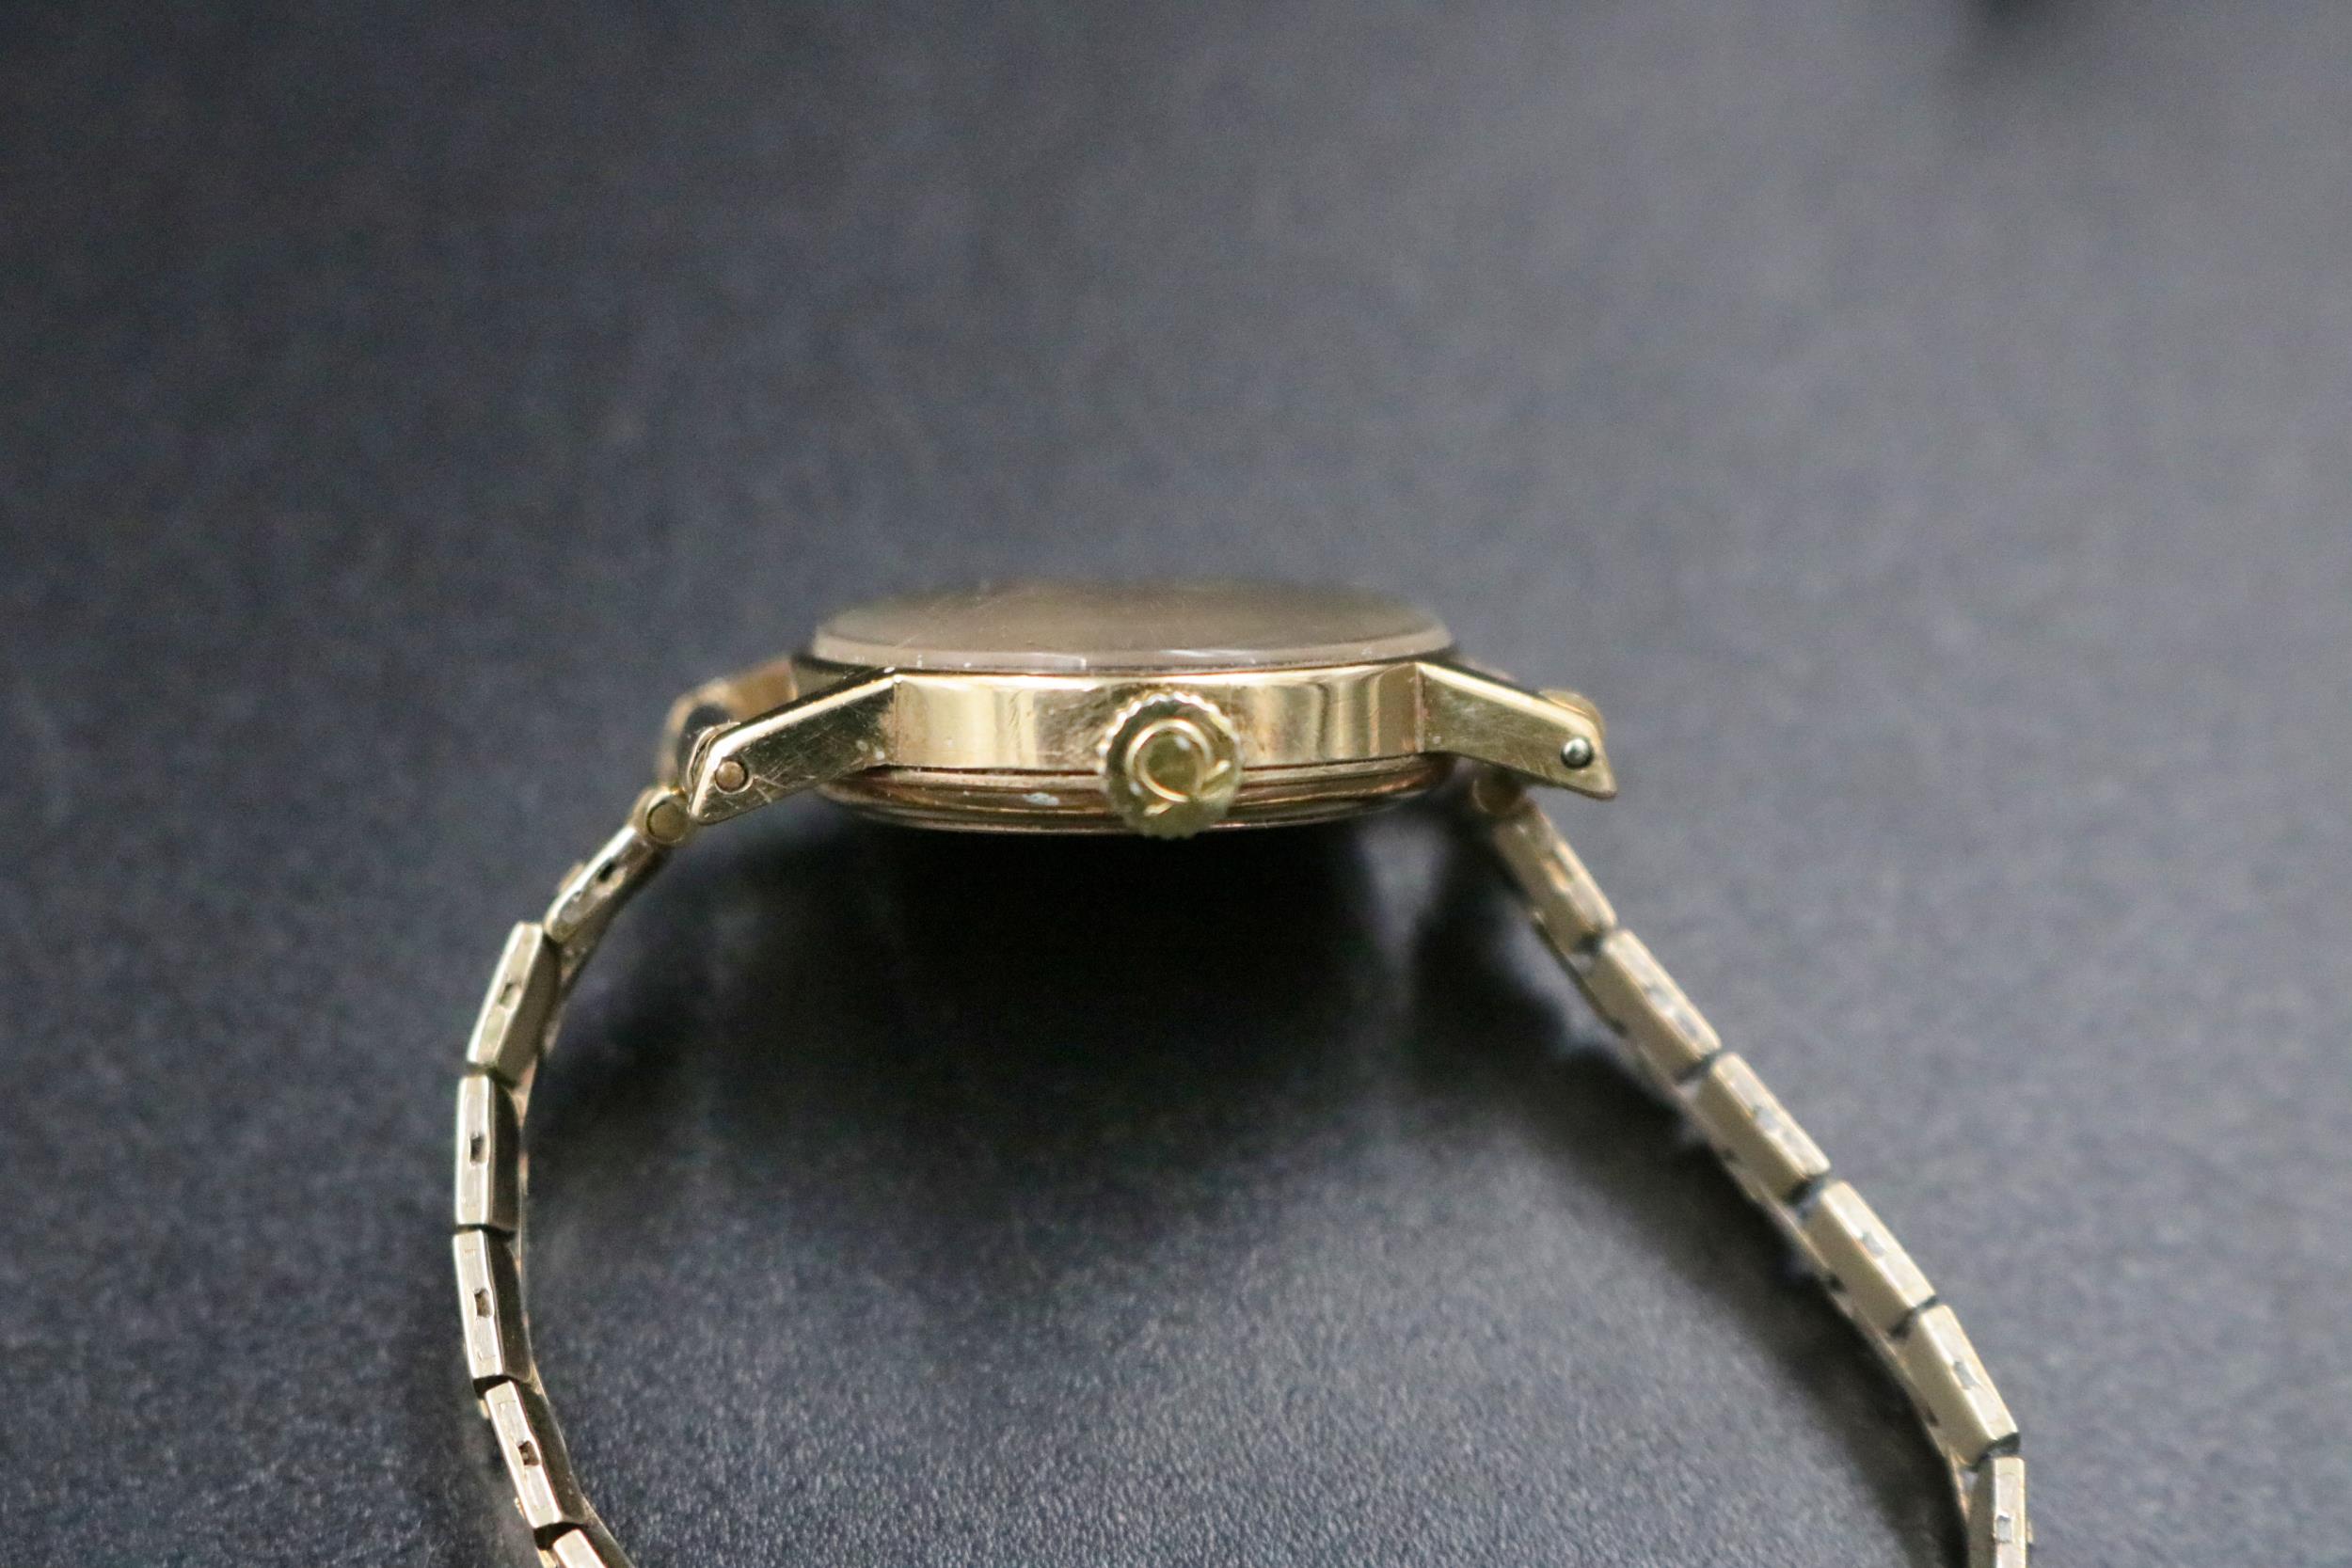 9ct gold ladies Omega watch including the bracelet in working condition (overall weight 16grams) - Image 6 of 8